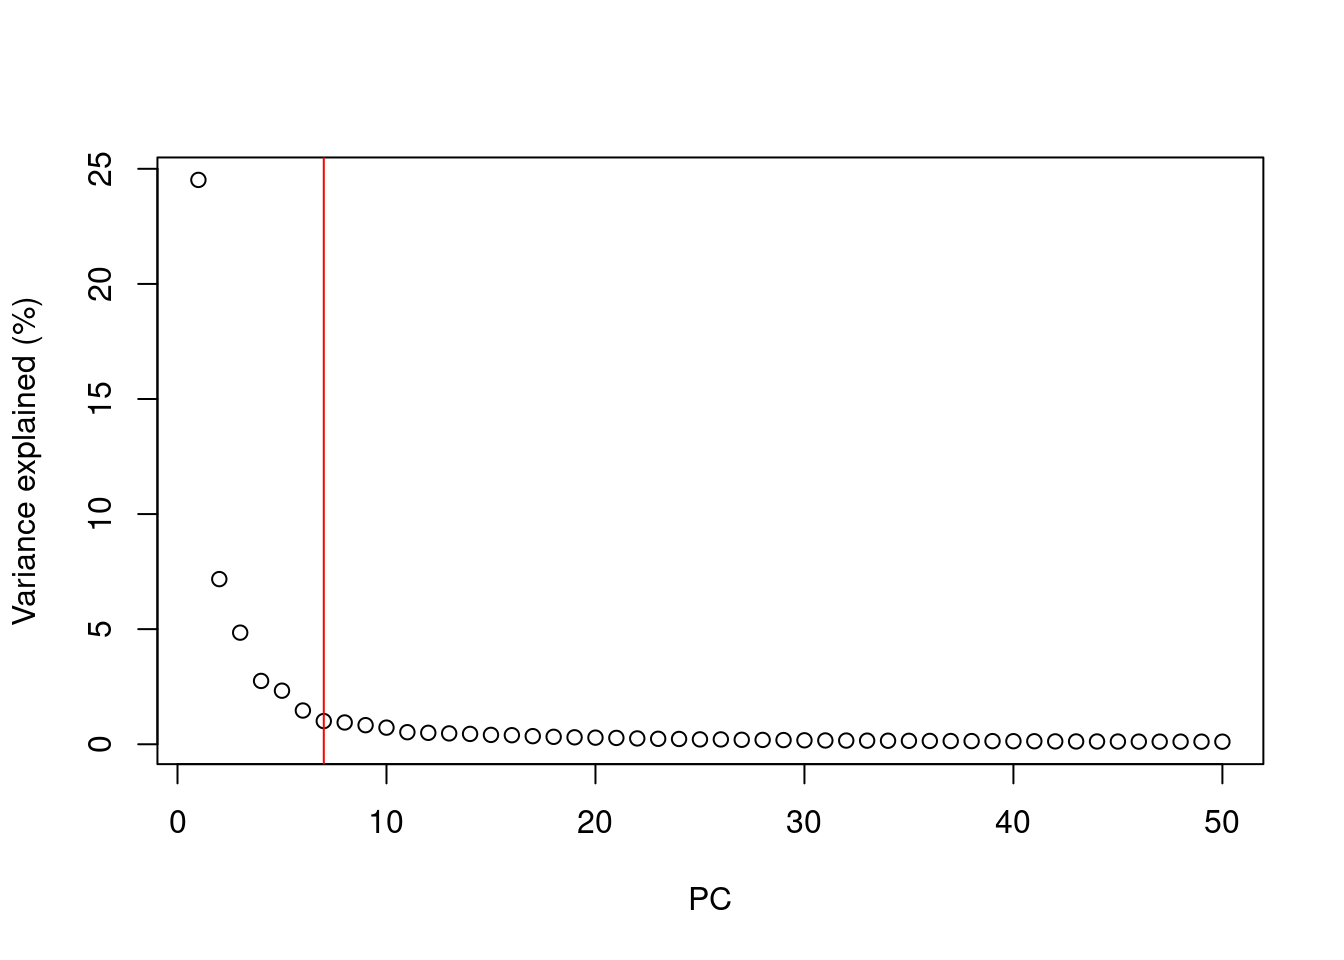 Percentage of variance explained by successive PCs in the Zeisel brain data. The identified elbow point is marked with a red line.